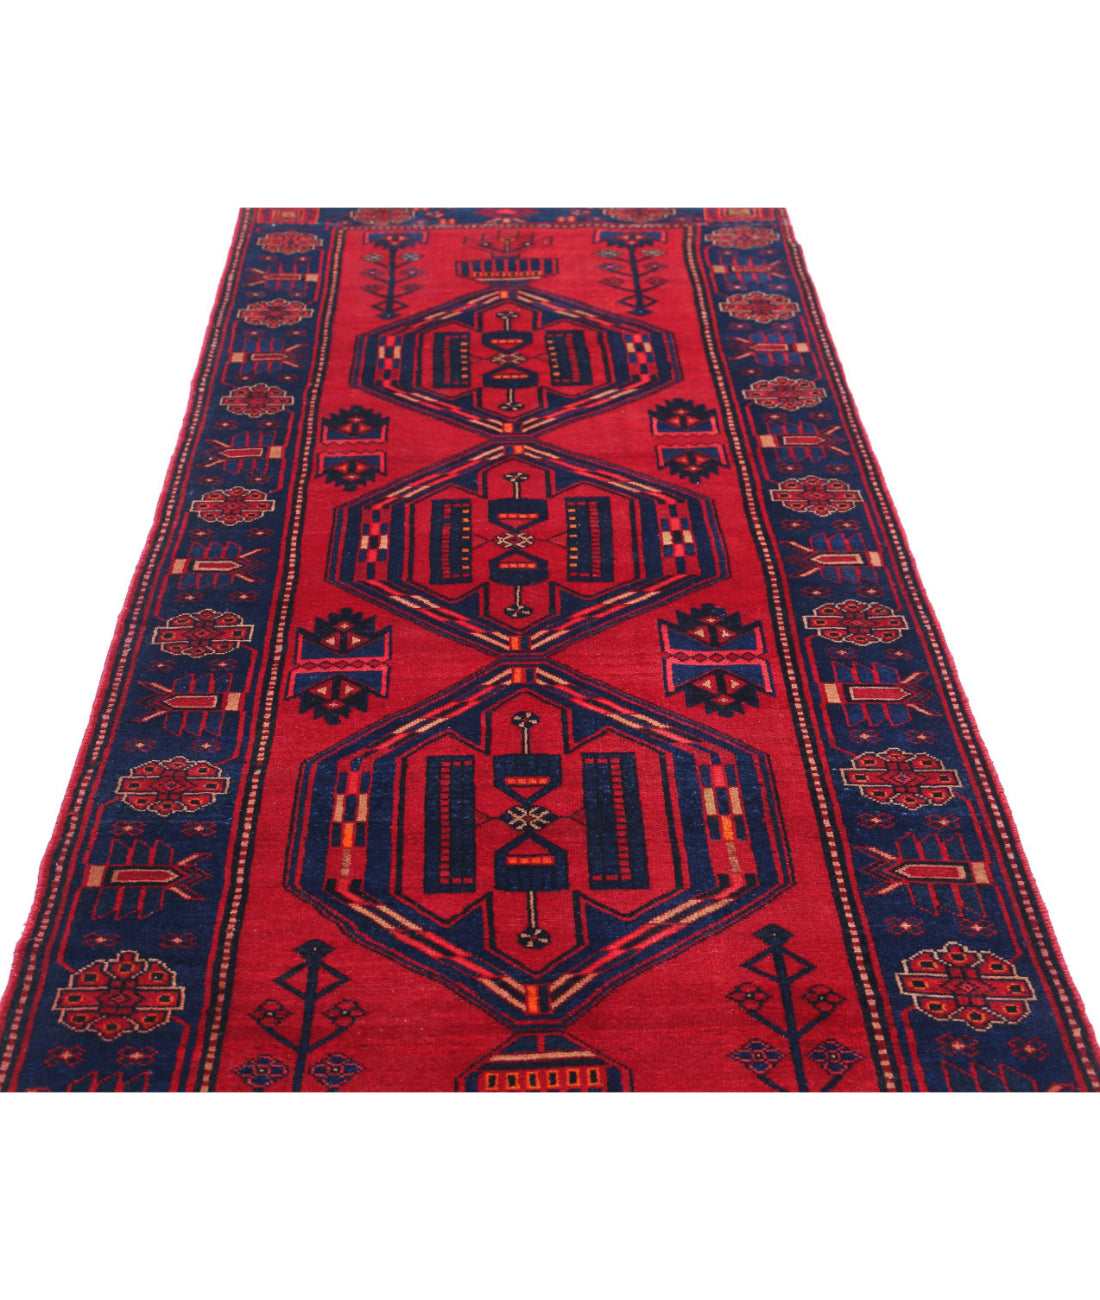 Hand Knotted Persian Hamadan Wool Rug - 3'6'' x 9'8'' 3'6'' x 9'8'' (105 X 290) / Red / Blue